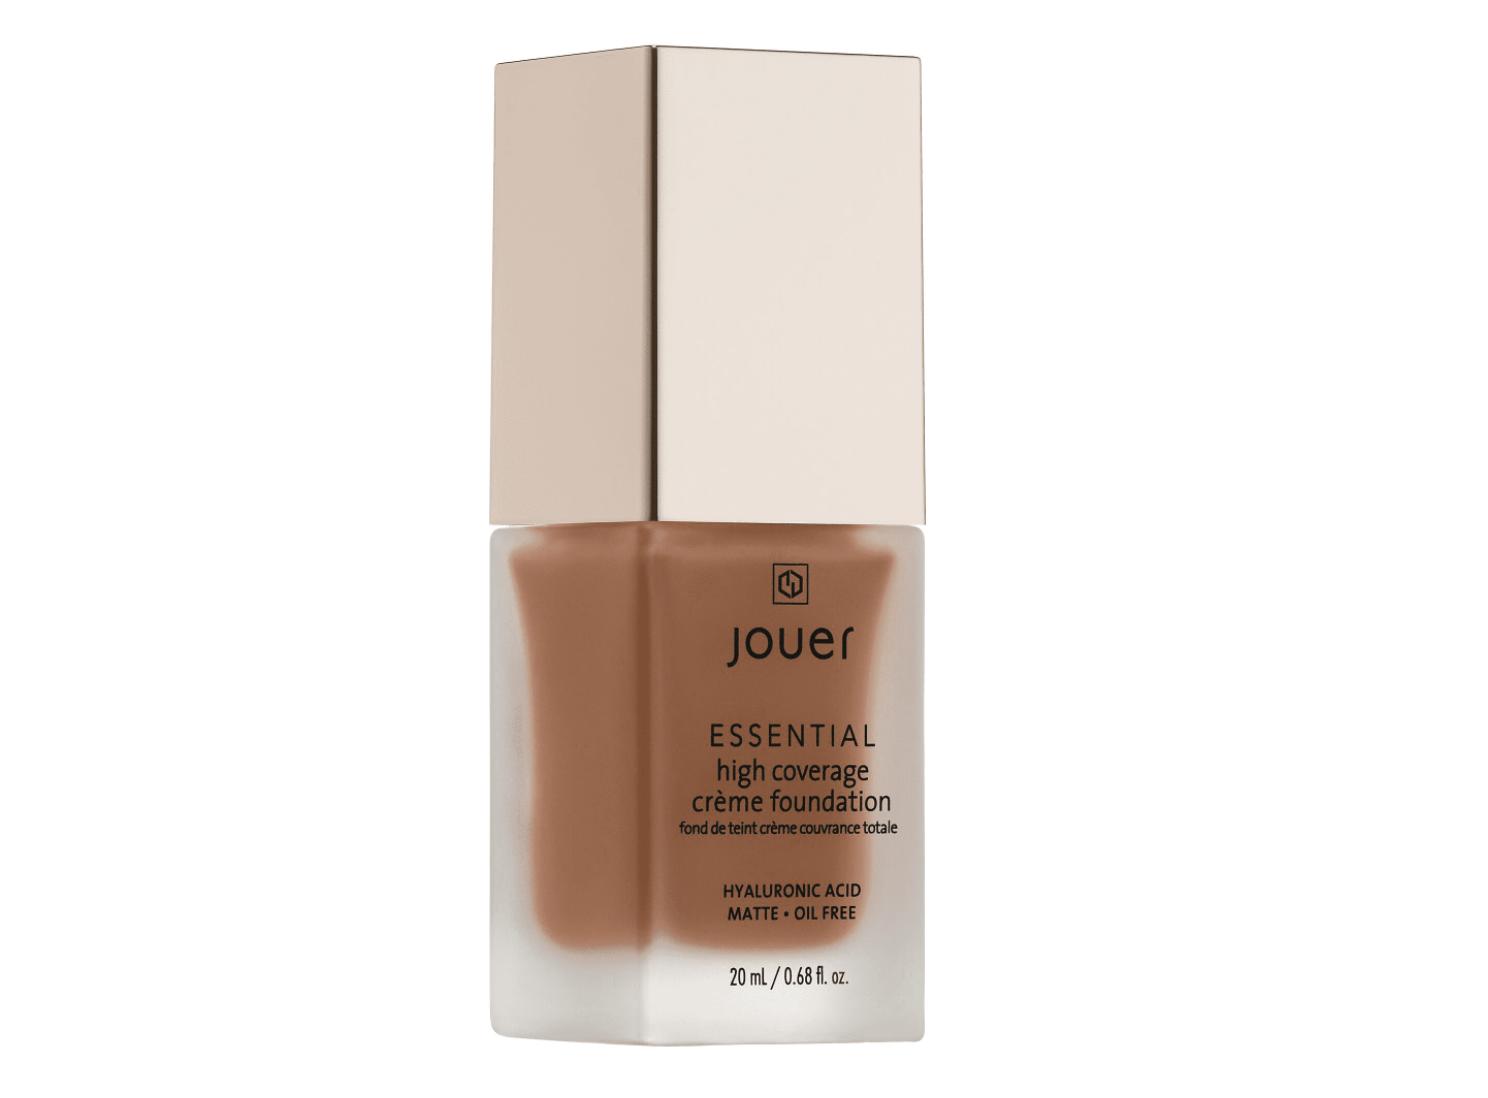 Jouer Essential High Coverage Creme Foundation Cocoa